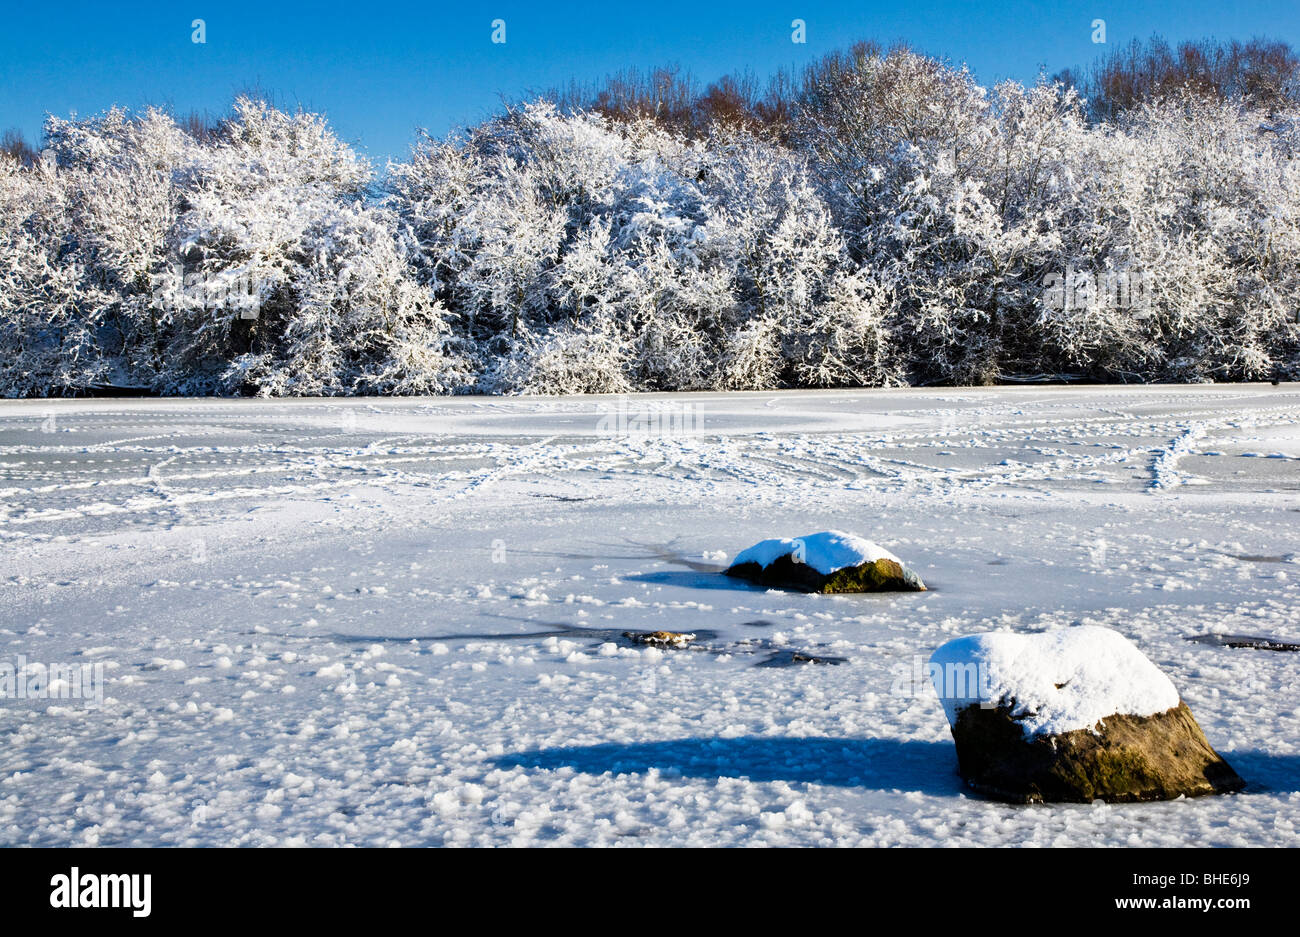 The frozen waters of a small lake known as Liden Lagoon in Swindon, Wiltshire, England, UK taken in January 2010 Stock Photo